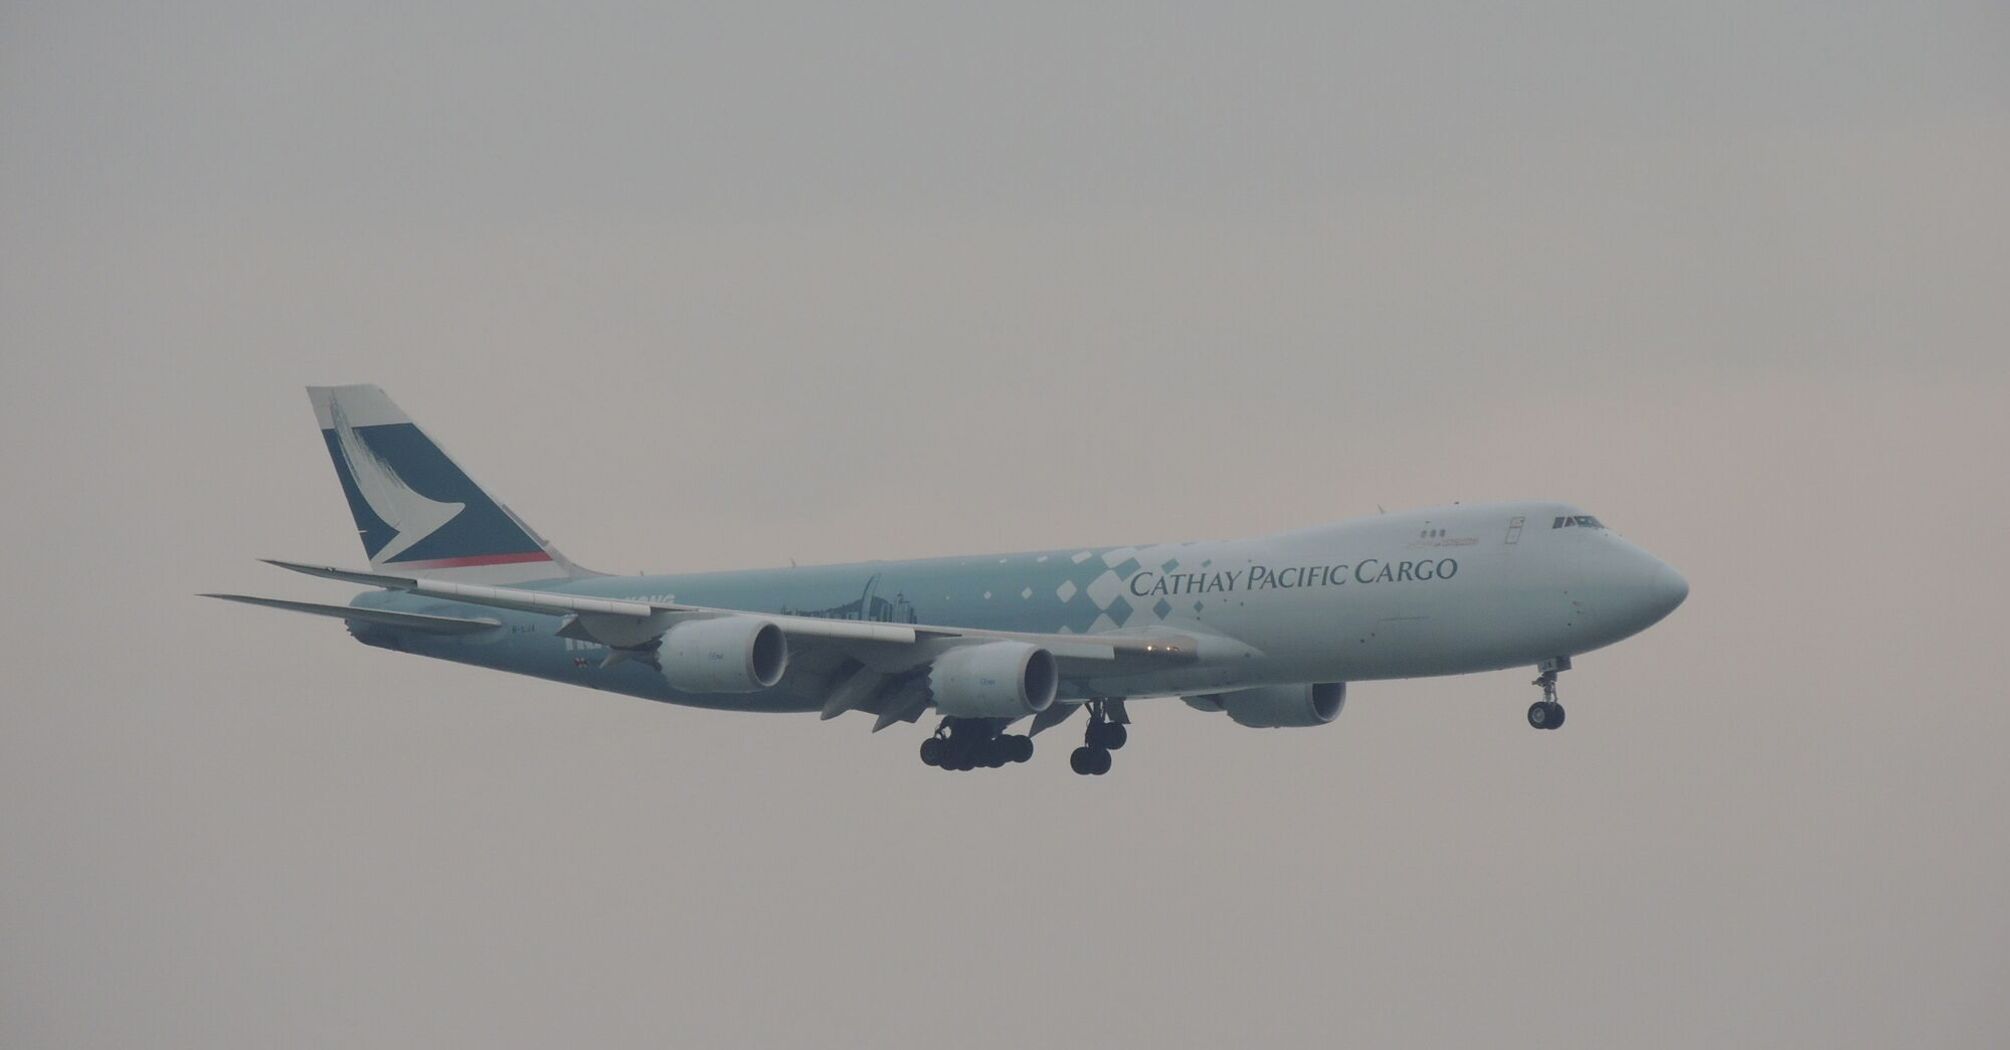 Cathay Pacific Cargo airplane in flight against a hazy sky